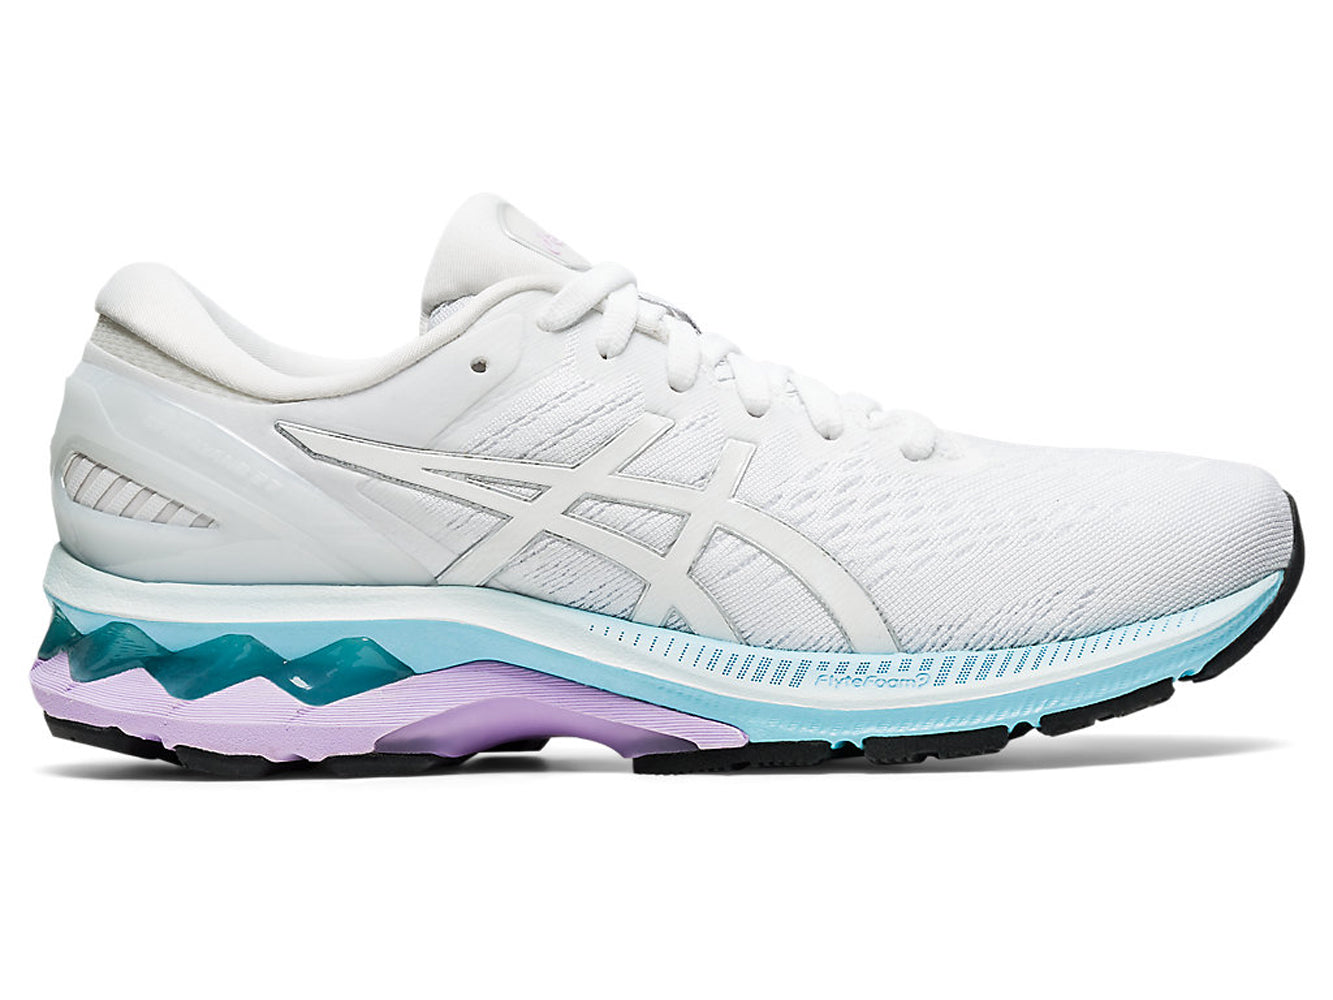 Women's Asics GEL-Kayano 27 Running Shoe in White/Pure Silver from the side